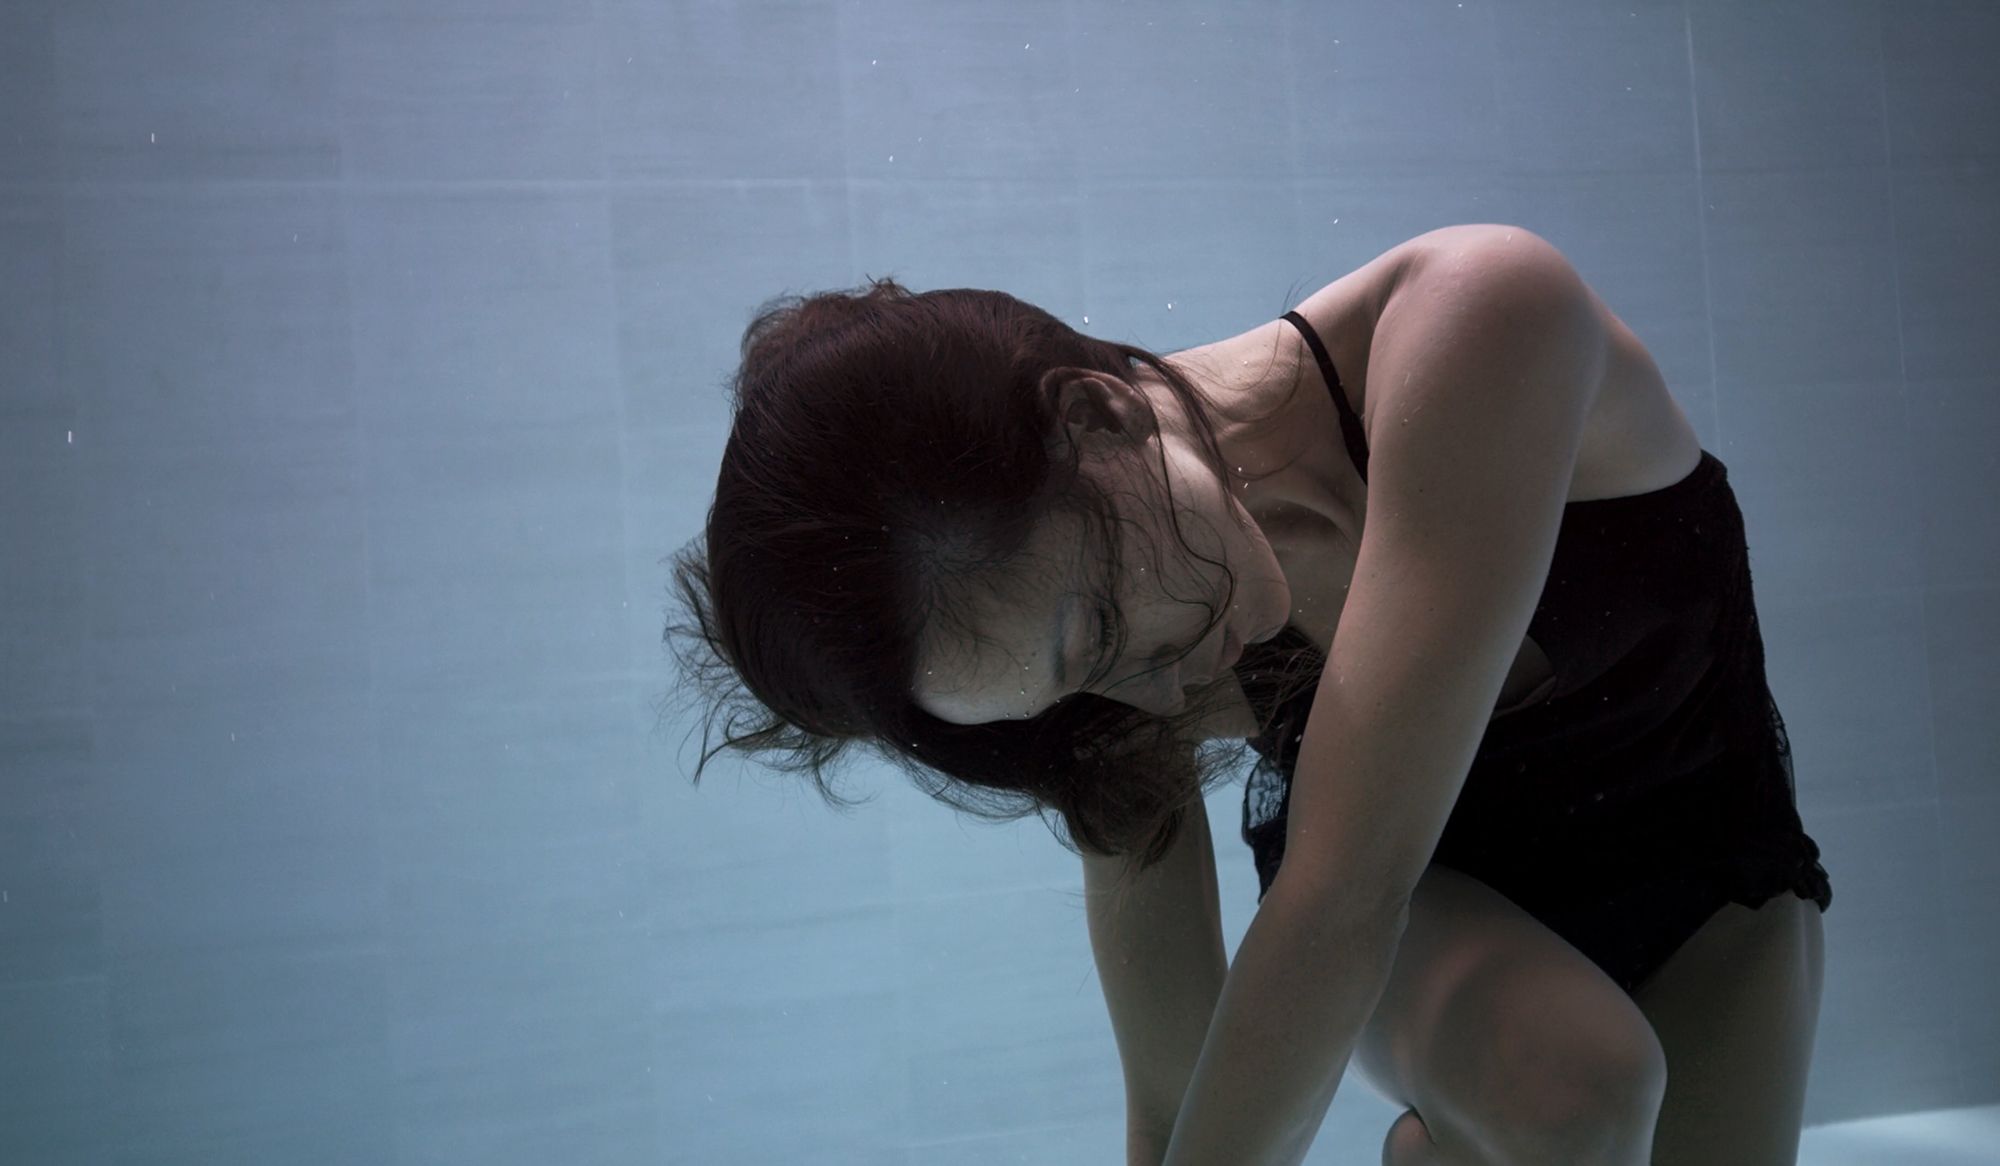 Exquisite subaquatic choreography stretches the limits of mind and body | Psyche